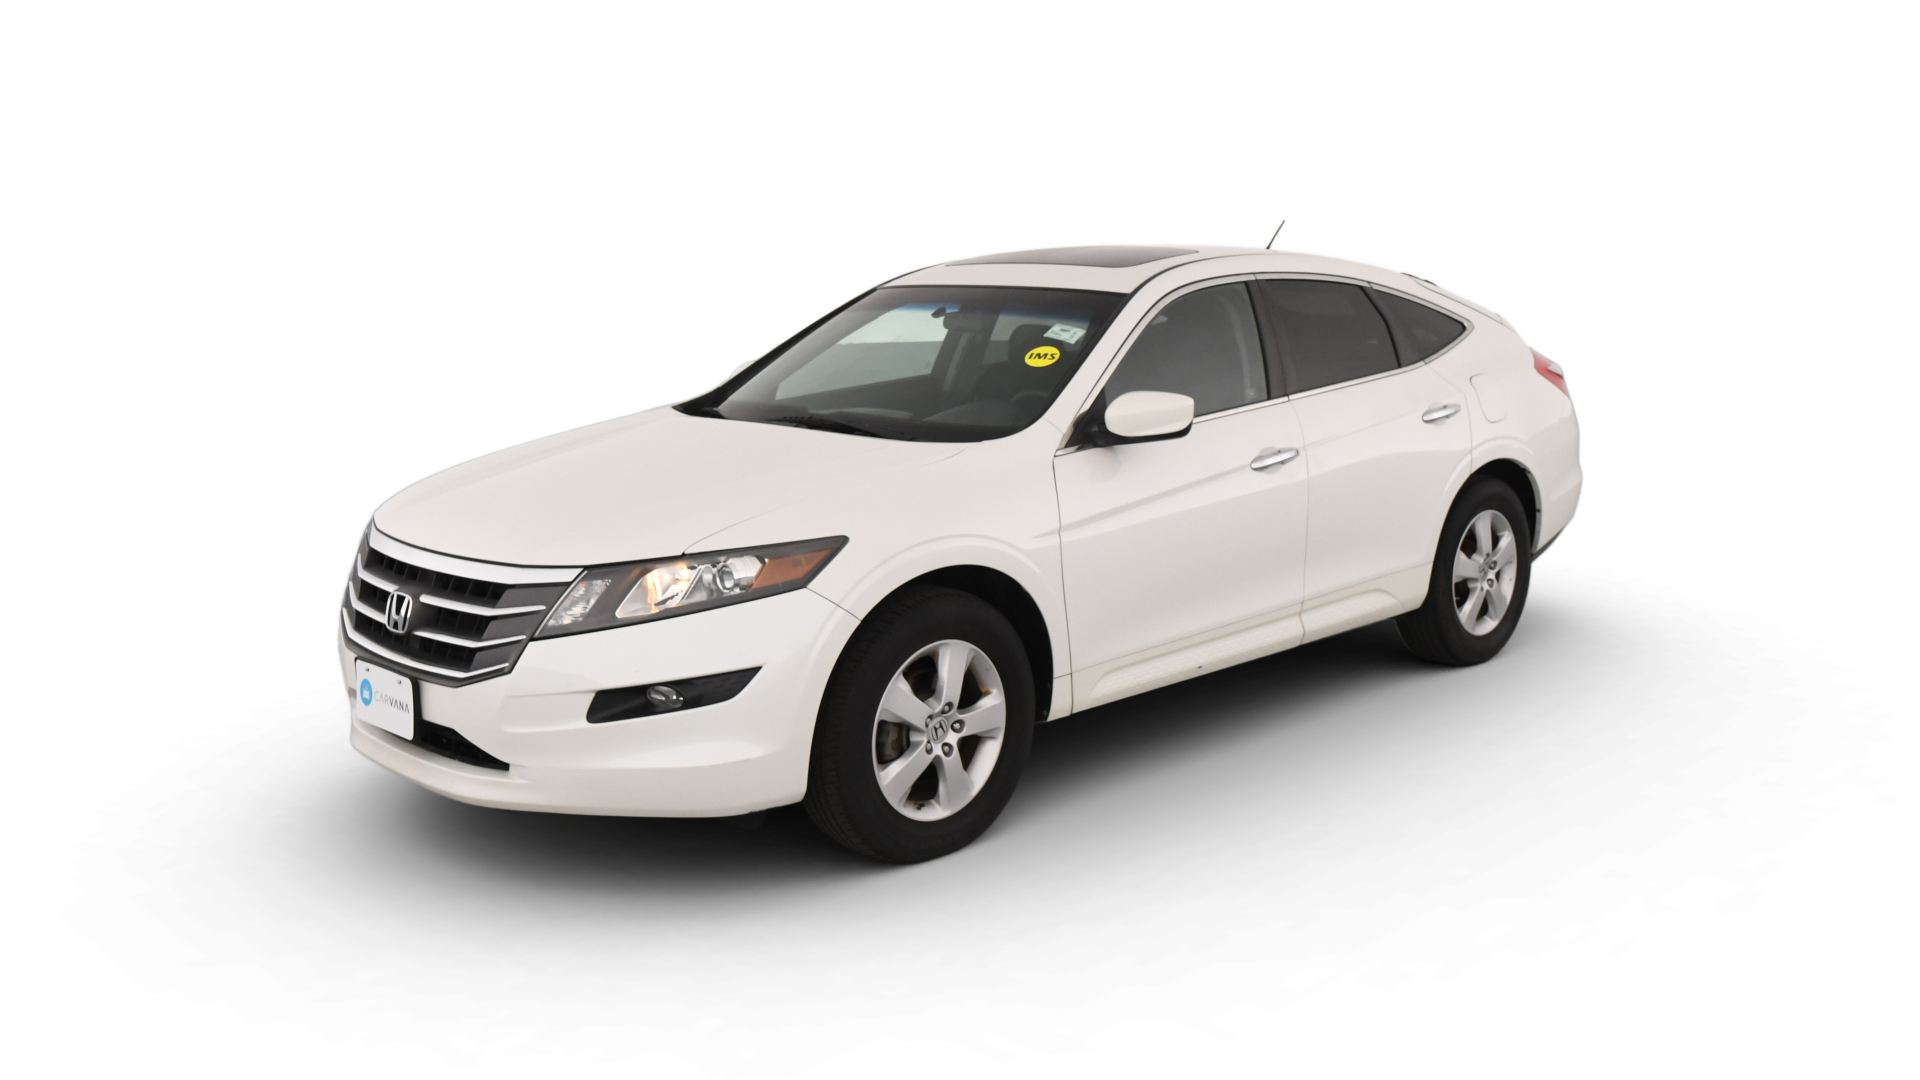 Used 2011 Honda Accord Crosstour For Sale Online | Carvana